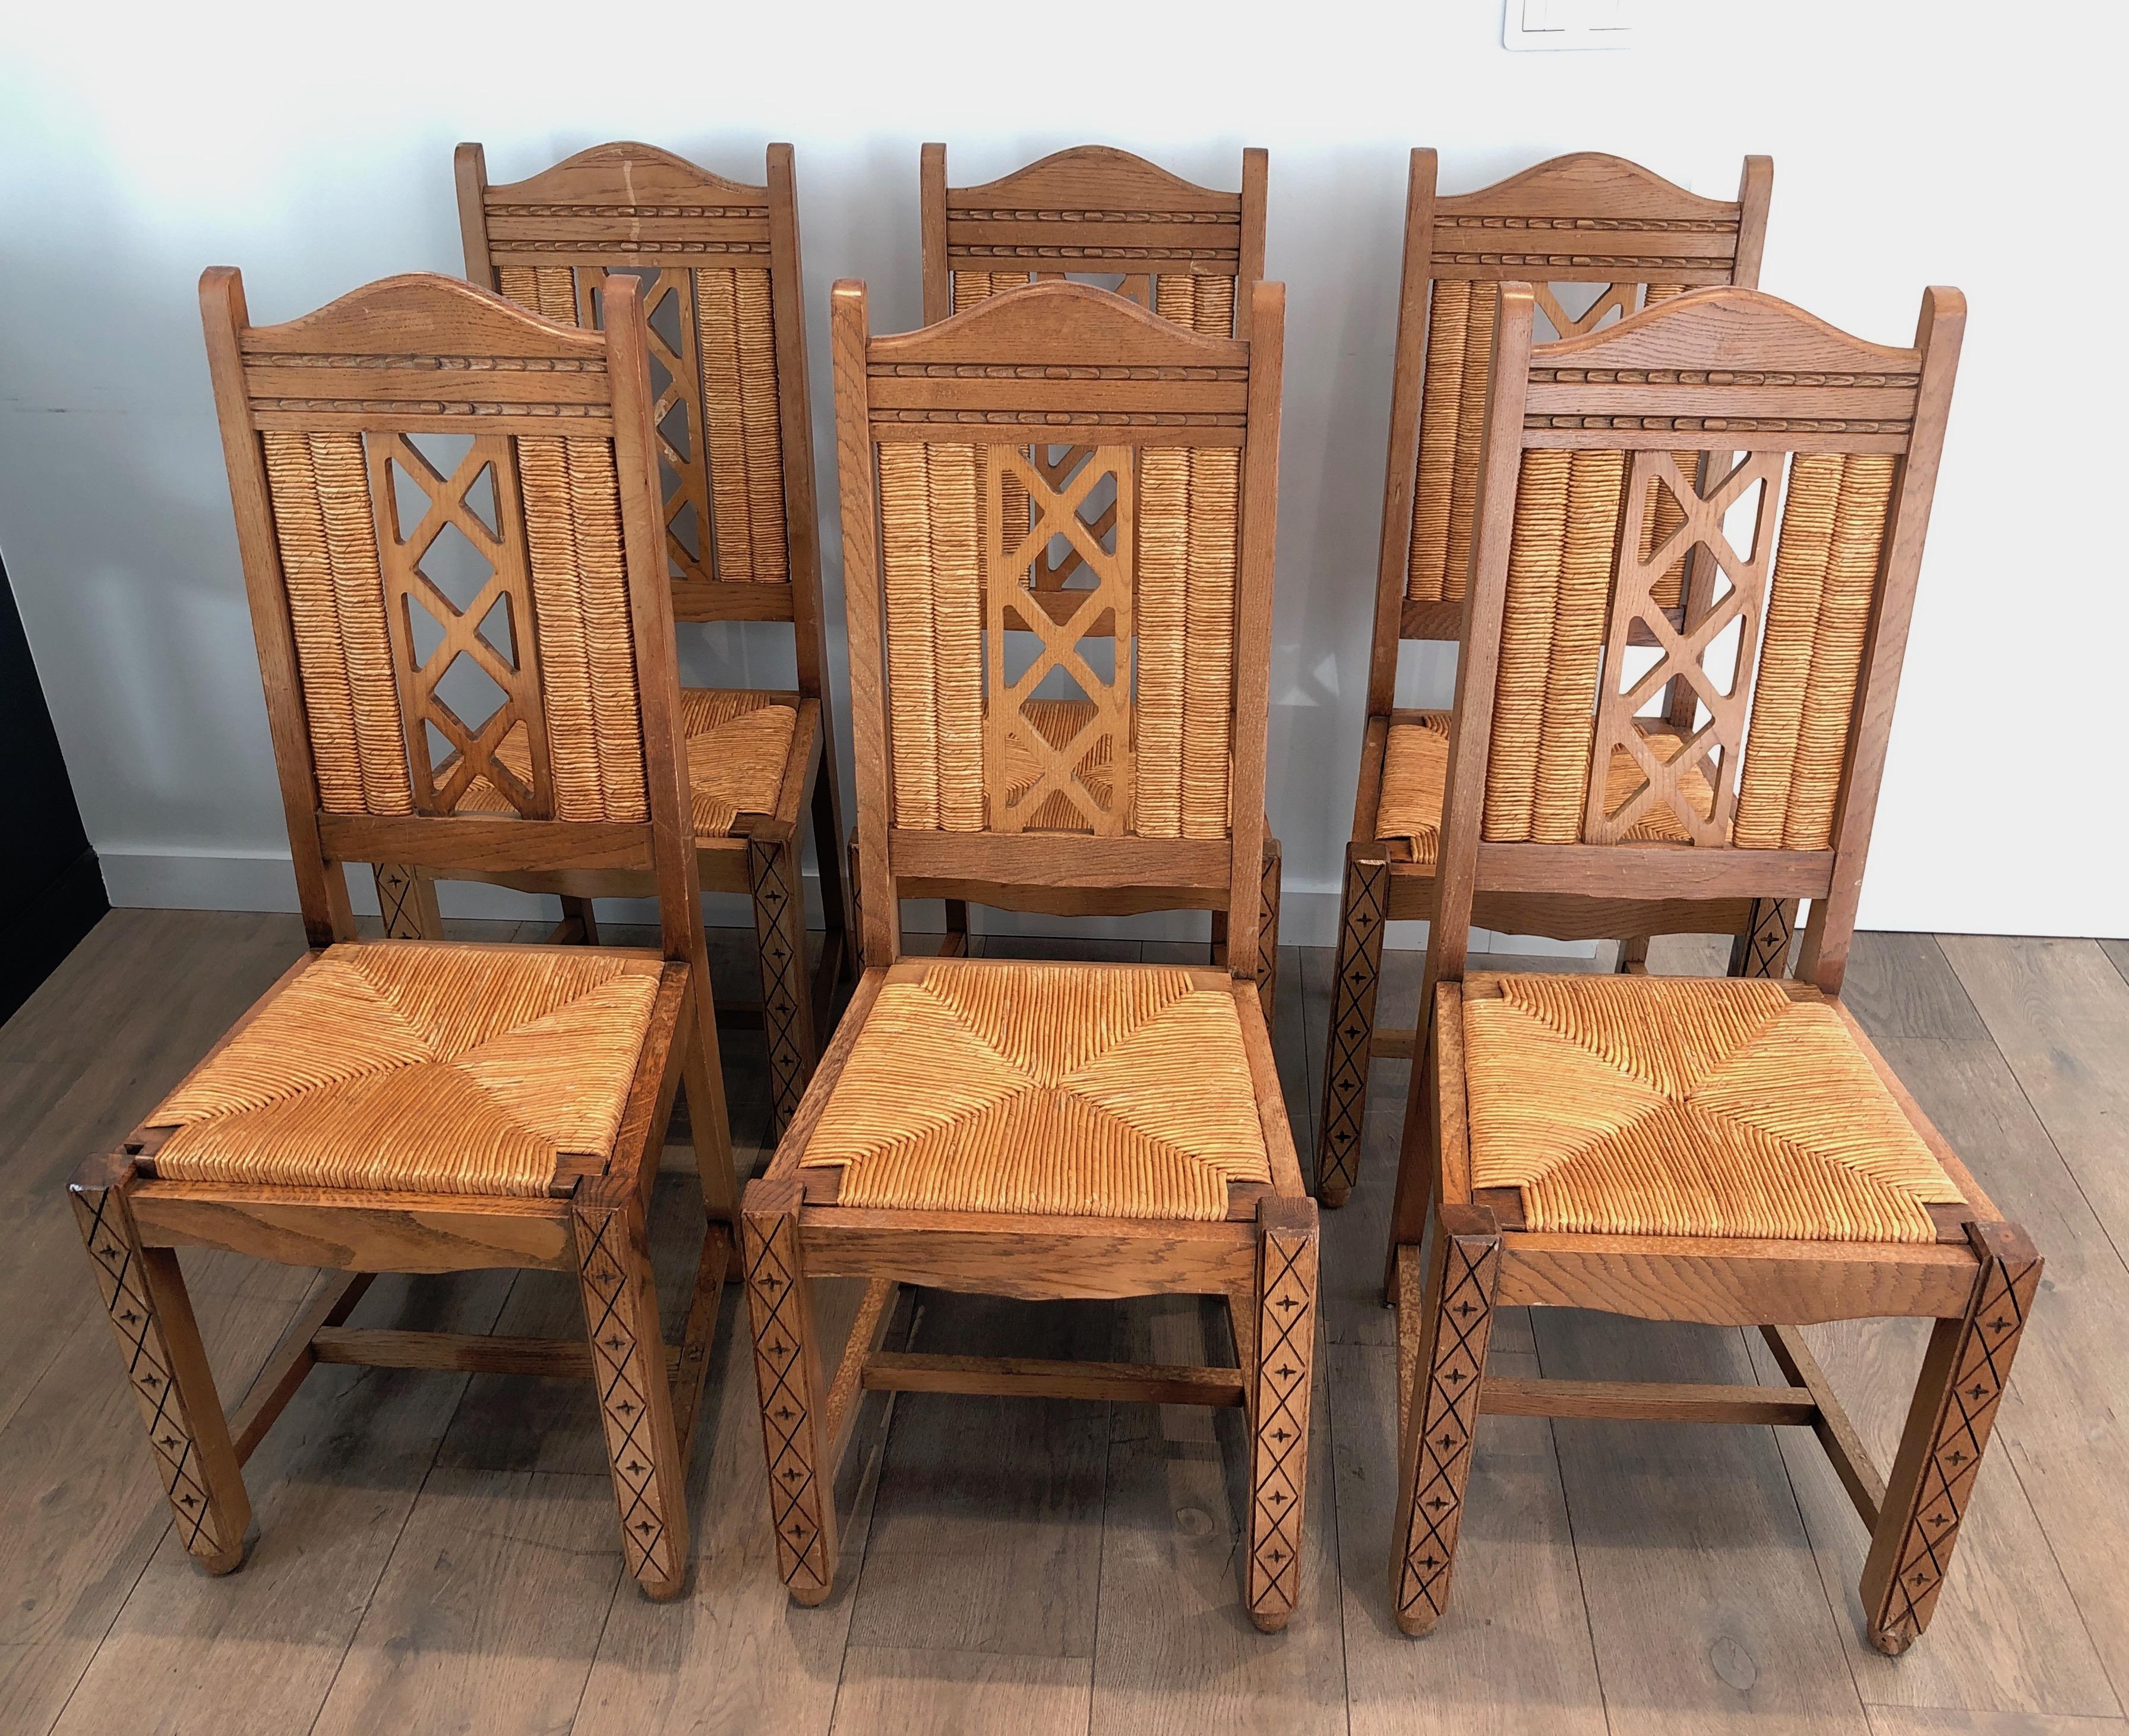 Set of 6 Brutalist Chairs Made of Ash and Straw, French Work, Circa 1950 For Sale 15